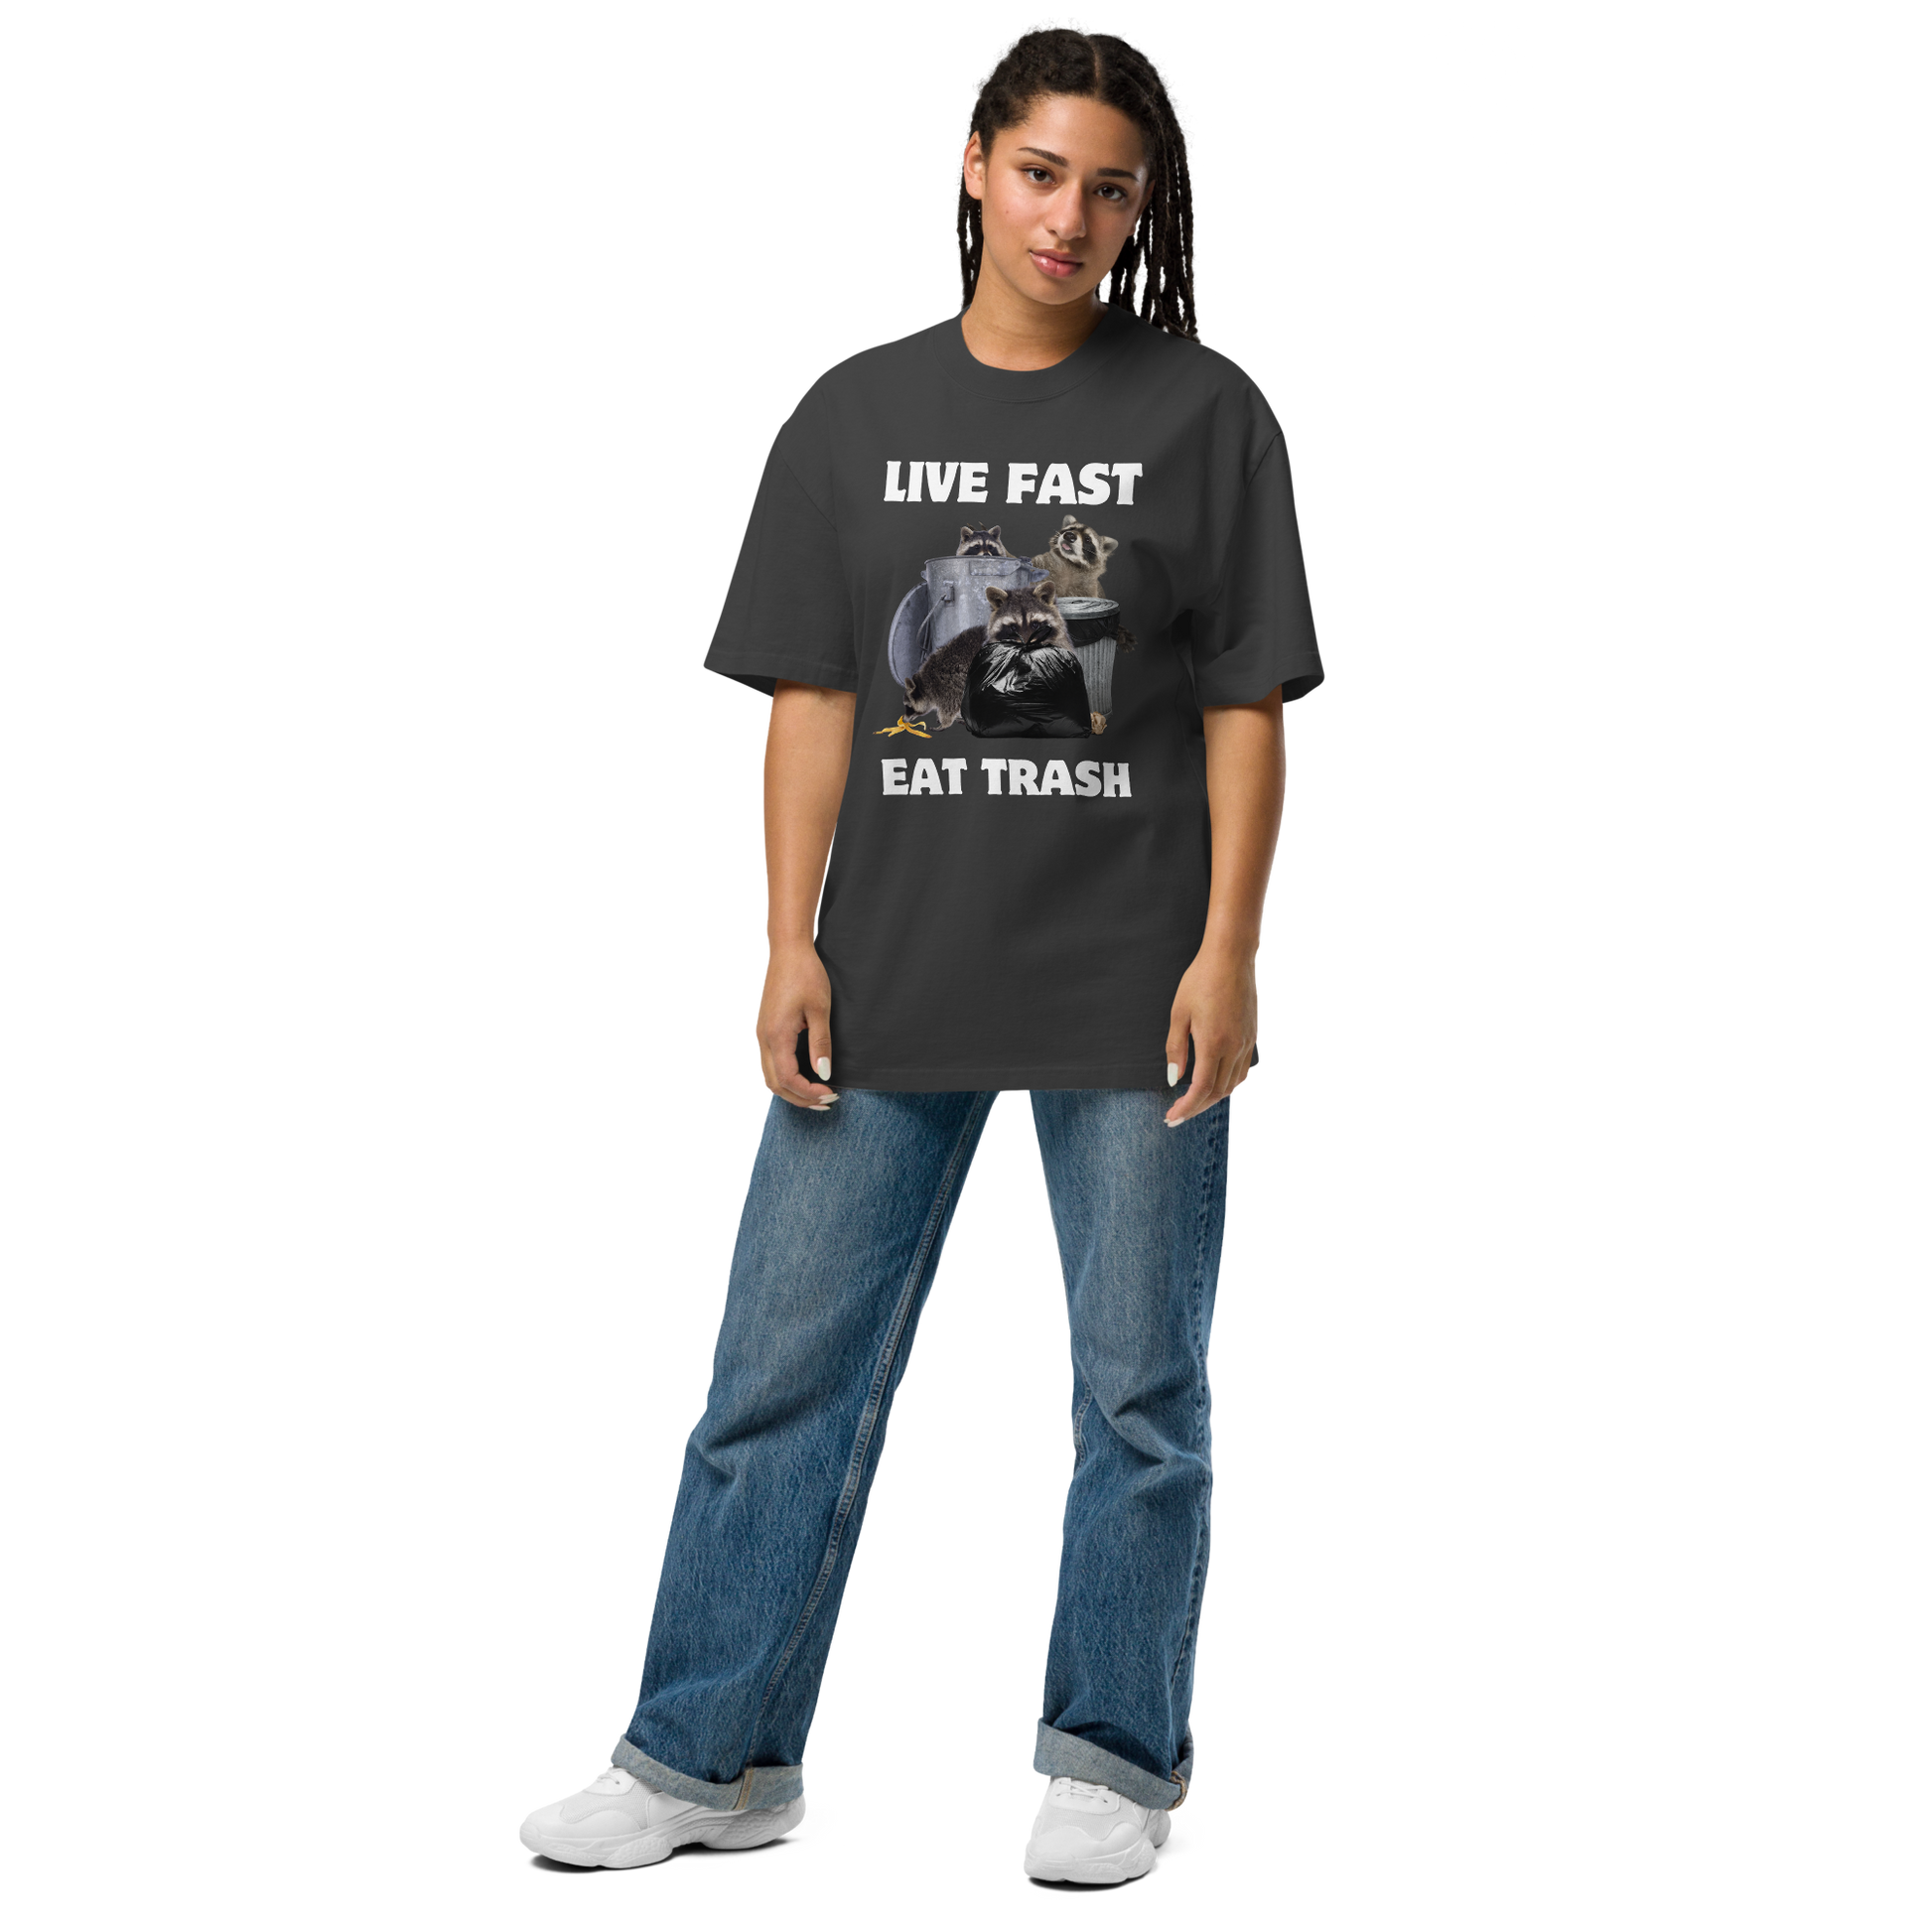 Woman wearing a Faded Black Raccoon Oversized T-Shirt featuring the bold Live Fast Eat Trash graphic on the chest - Funny Graphic Raccoon Oversized Tees - Boozy Fox